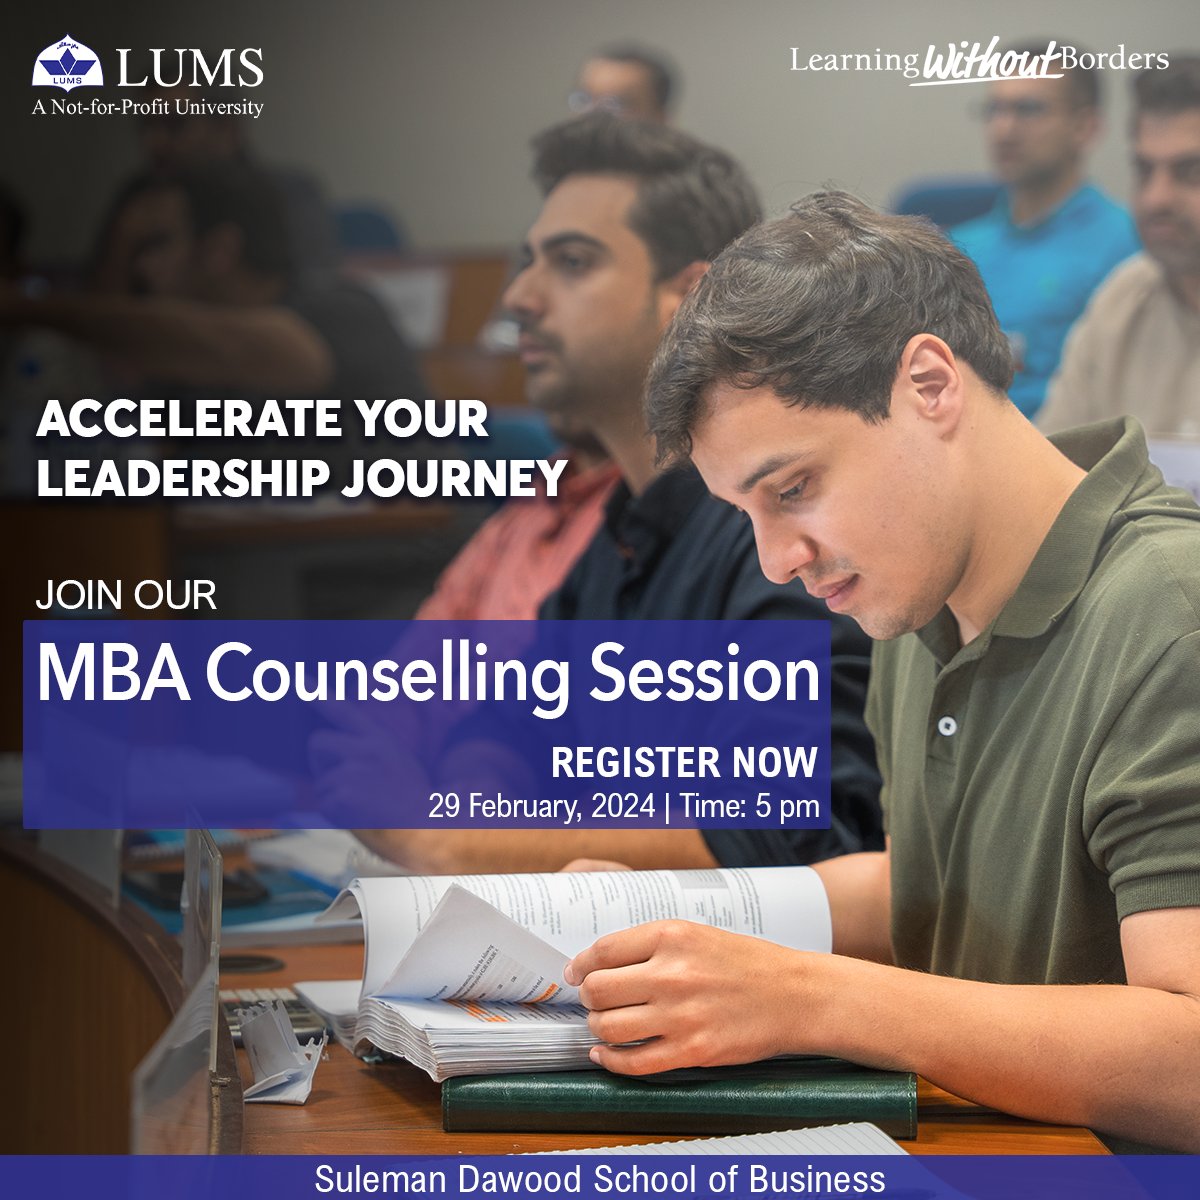 Join the online MBA counselling session, hosted by the @SDSB_LUMS, to gain insights into the programme and receive valuable guidance from the SDSB faculty. Register now: bit.ly/3wsSzue #LearningWithoutBorders